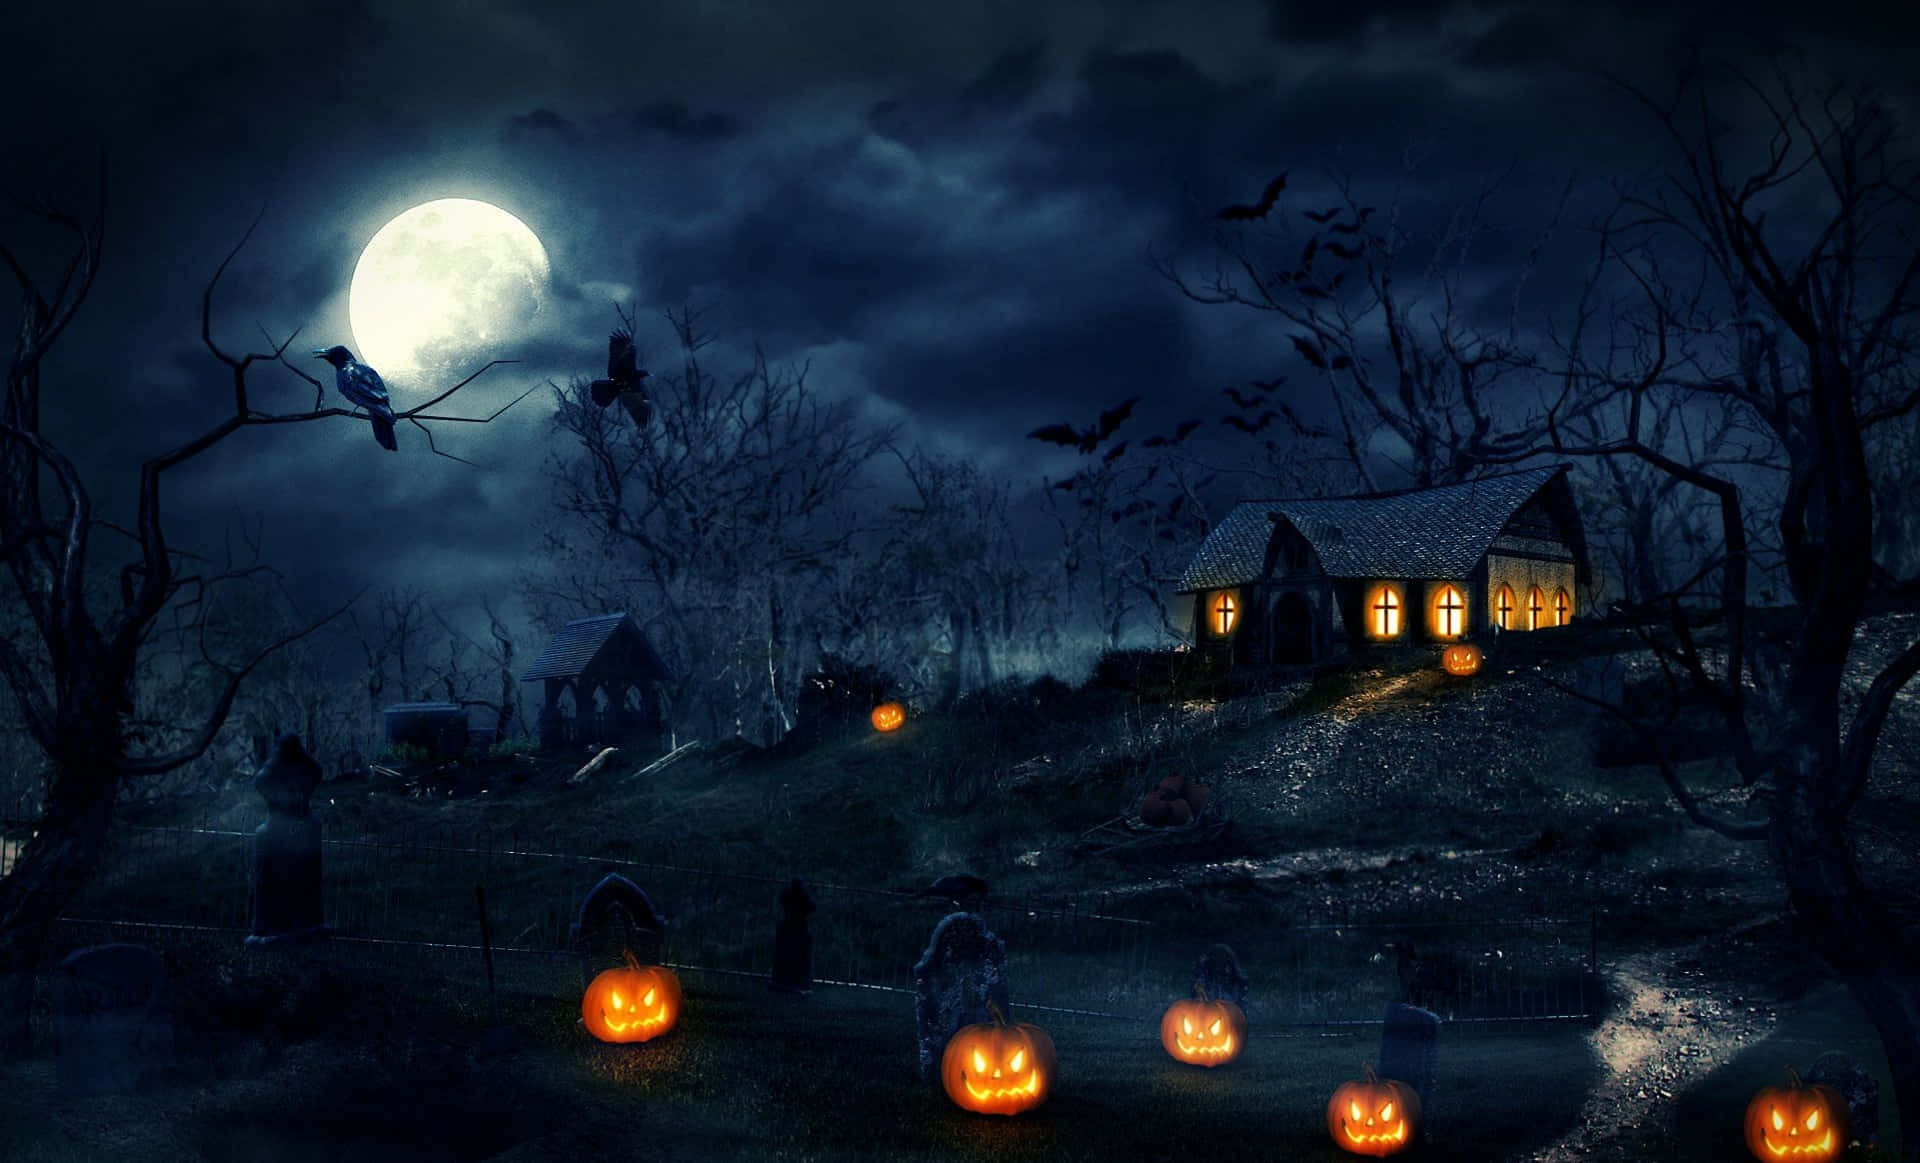 "Ghouls and Ghosts Lurking This Halloween Night"